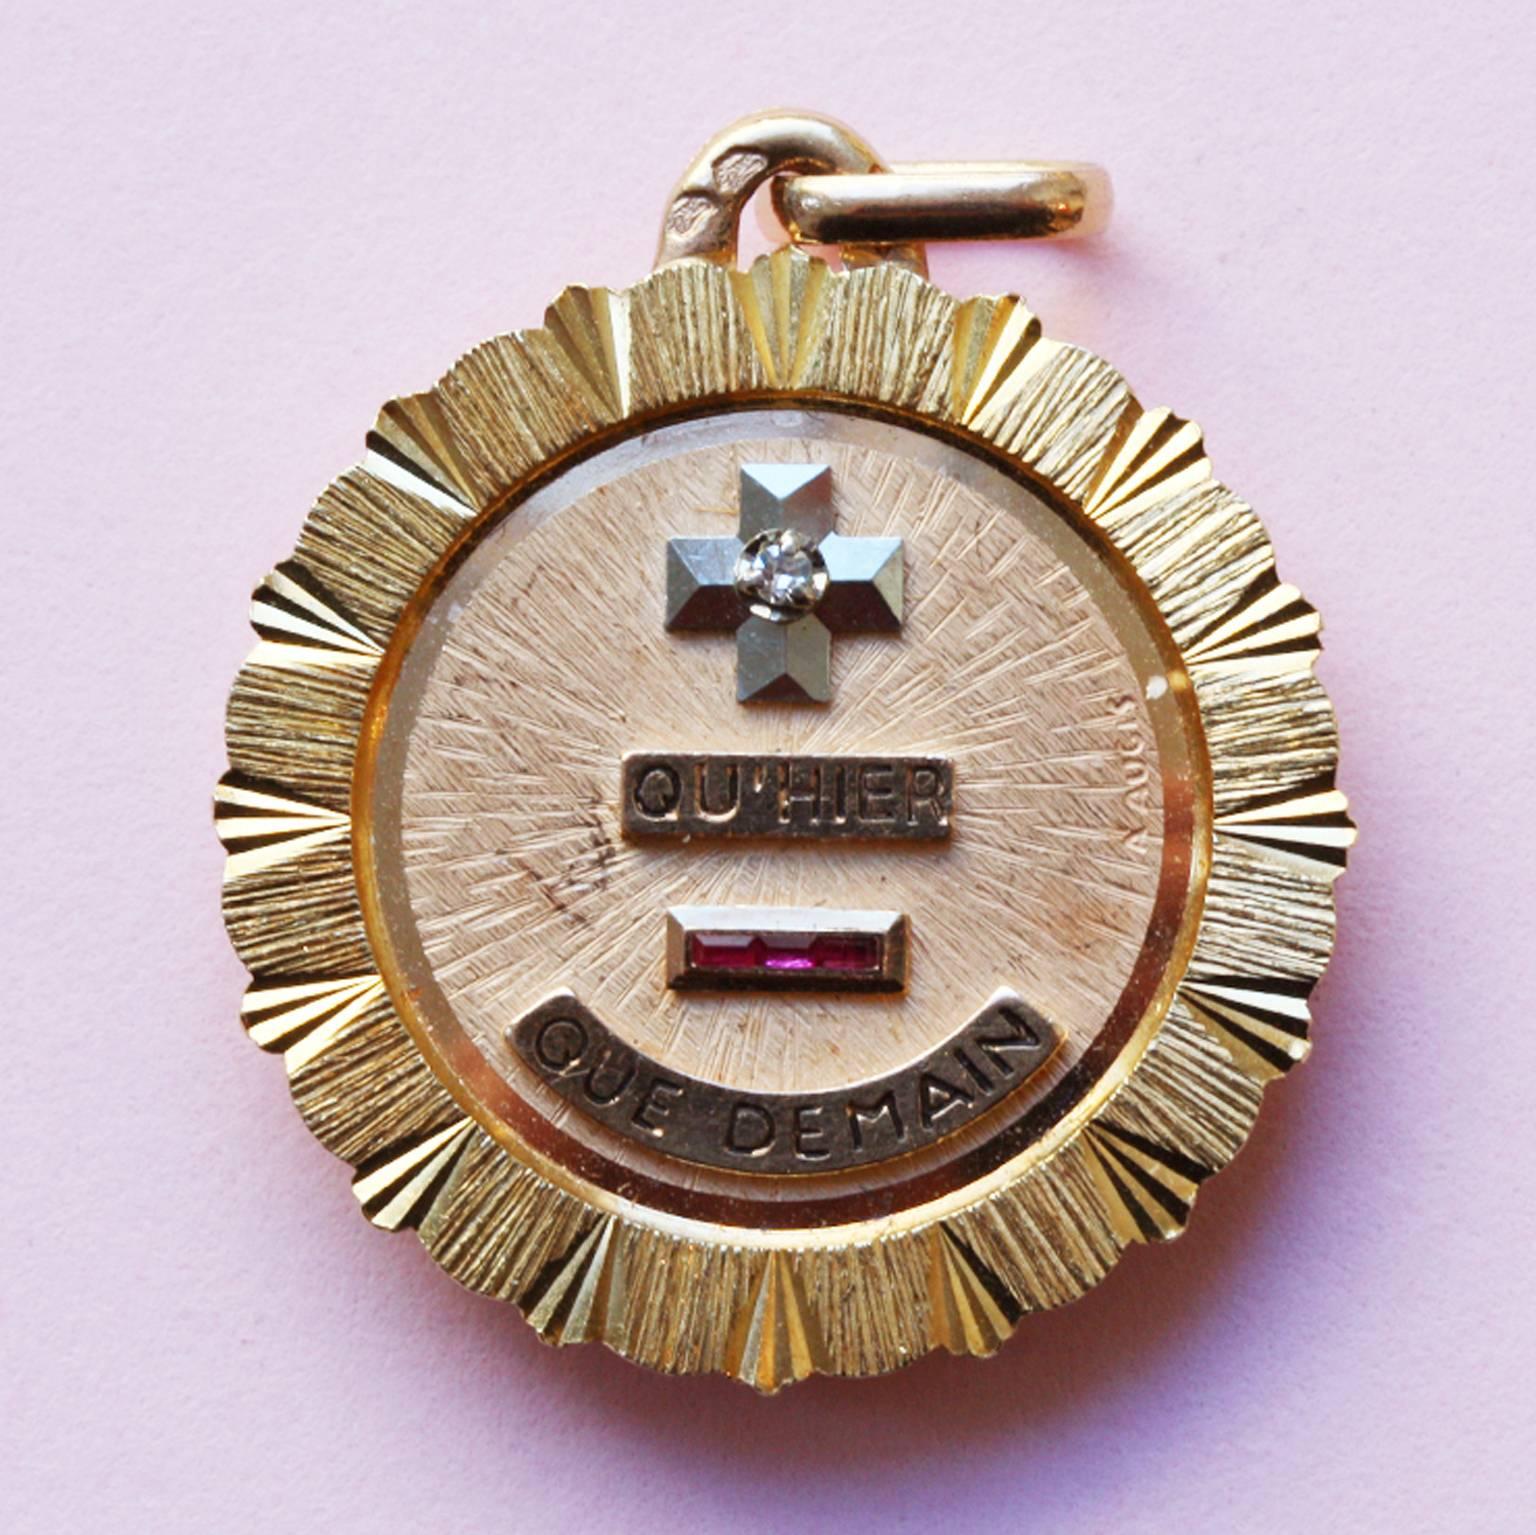 An 18 carat gold charm and locket with the text 